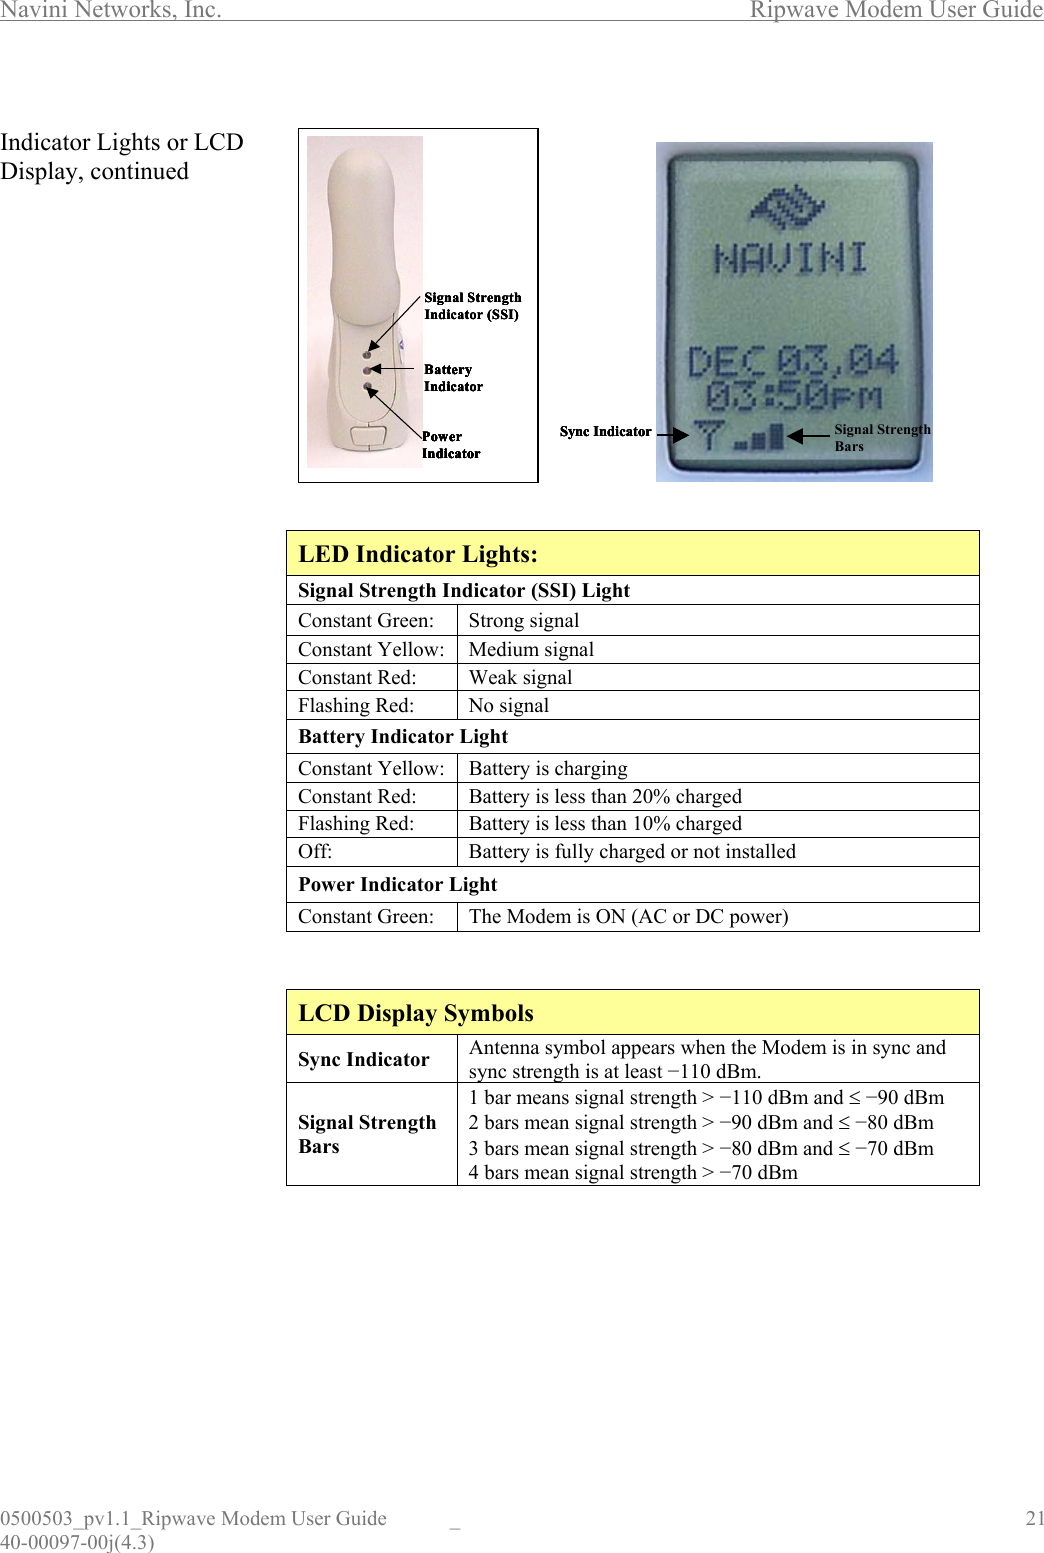 Navini Networks, Inc.        Ripwave Modem User Guide 0500503_pv1.1_Ripwave Modem User Guide  _                                    21 40-00097-00j(4.3)  Indicator Lights or LCD Display, continued                                                          LED Indicator Lights: Signal Strength Indicator (SSI) Light Constant Green:  Strong signal Constant Yellow:  Medium signal Constant Red:  Weak signal Flashing Red:  No signal Battery Indicator Light Constant Yellow:  Battery is charging Constant Red:  Battery is less than 20% charged Flashing Red:  Battery is less than 10% charged Off:  Battery is fully charged or not installed Power Indicator Light Constant Green:  The Modem is ON (AC or DC power)   LCD Display Symbols  Sync Indicator   Antenna symbol appears when the Modem is in sync and sync strength is at least −110 dBm.  Signal Strength Bars 1 bar means signal strength &gt; −110 dBm and ≤ −90 dBm  2 bars mean signal strength &gt; −90 dBm and ≤ −80 dBm  3 bars mean signal strength &gt; −80 dBm and ≤ −70 dBm 4 bars mean signal strength &gt; −70 dBm         Signal Strength Indicator (SSI)Power IndicatorBattery IndicatorSignal Strength Indicator (SSI)Power IndicatorBattery IndicatorPower IndicatorBattery IndicatorSync Indicator Signal Strength BarsSignal Strength Indicator (SSI)Power IndicatorBattery IndicatorSignal Strength Indicator (SSI)Power IndicatorBattery IndicatorPower IndicatorBattery IndicatorSync Indicator Signal Strength BarsSync IndicatorSync Indicator Signal Strength Bars